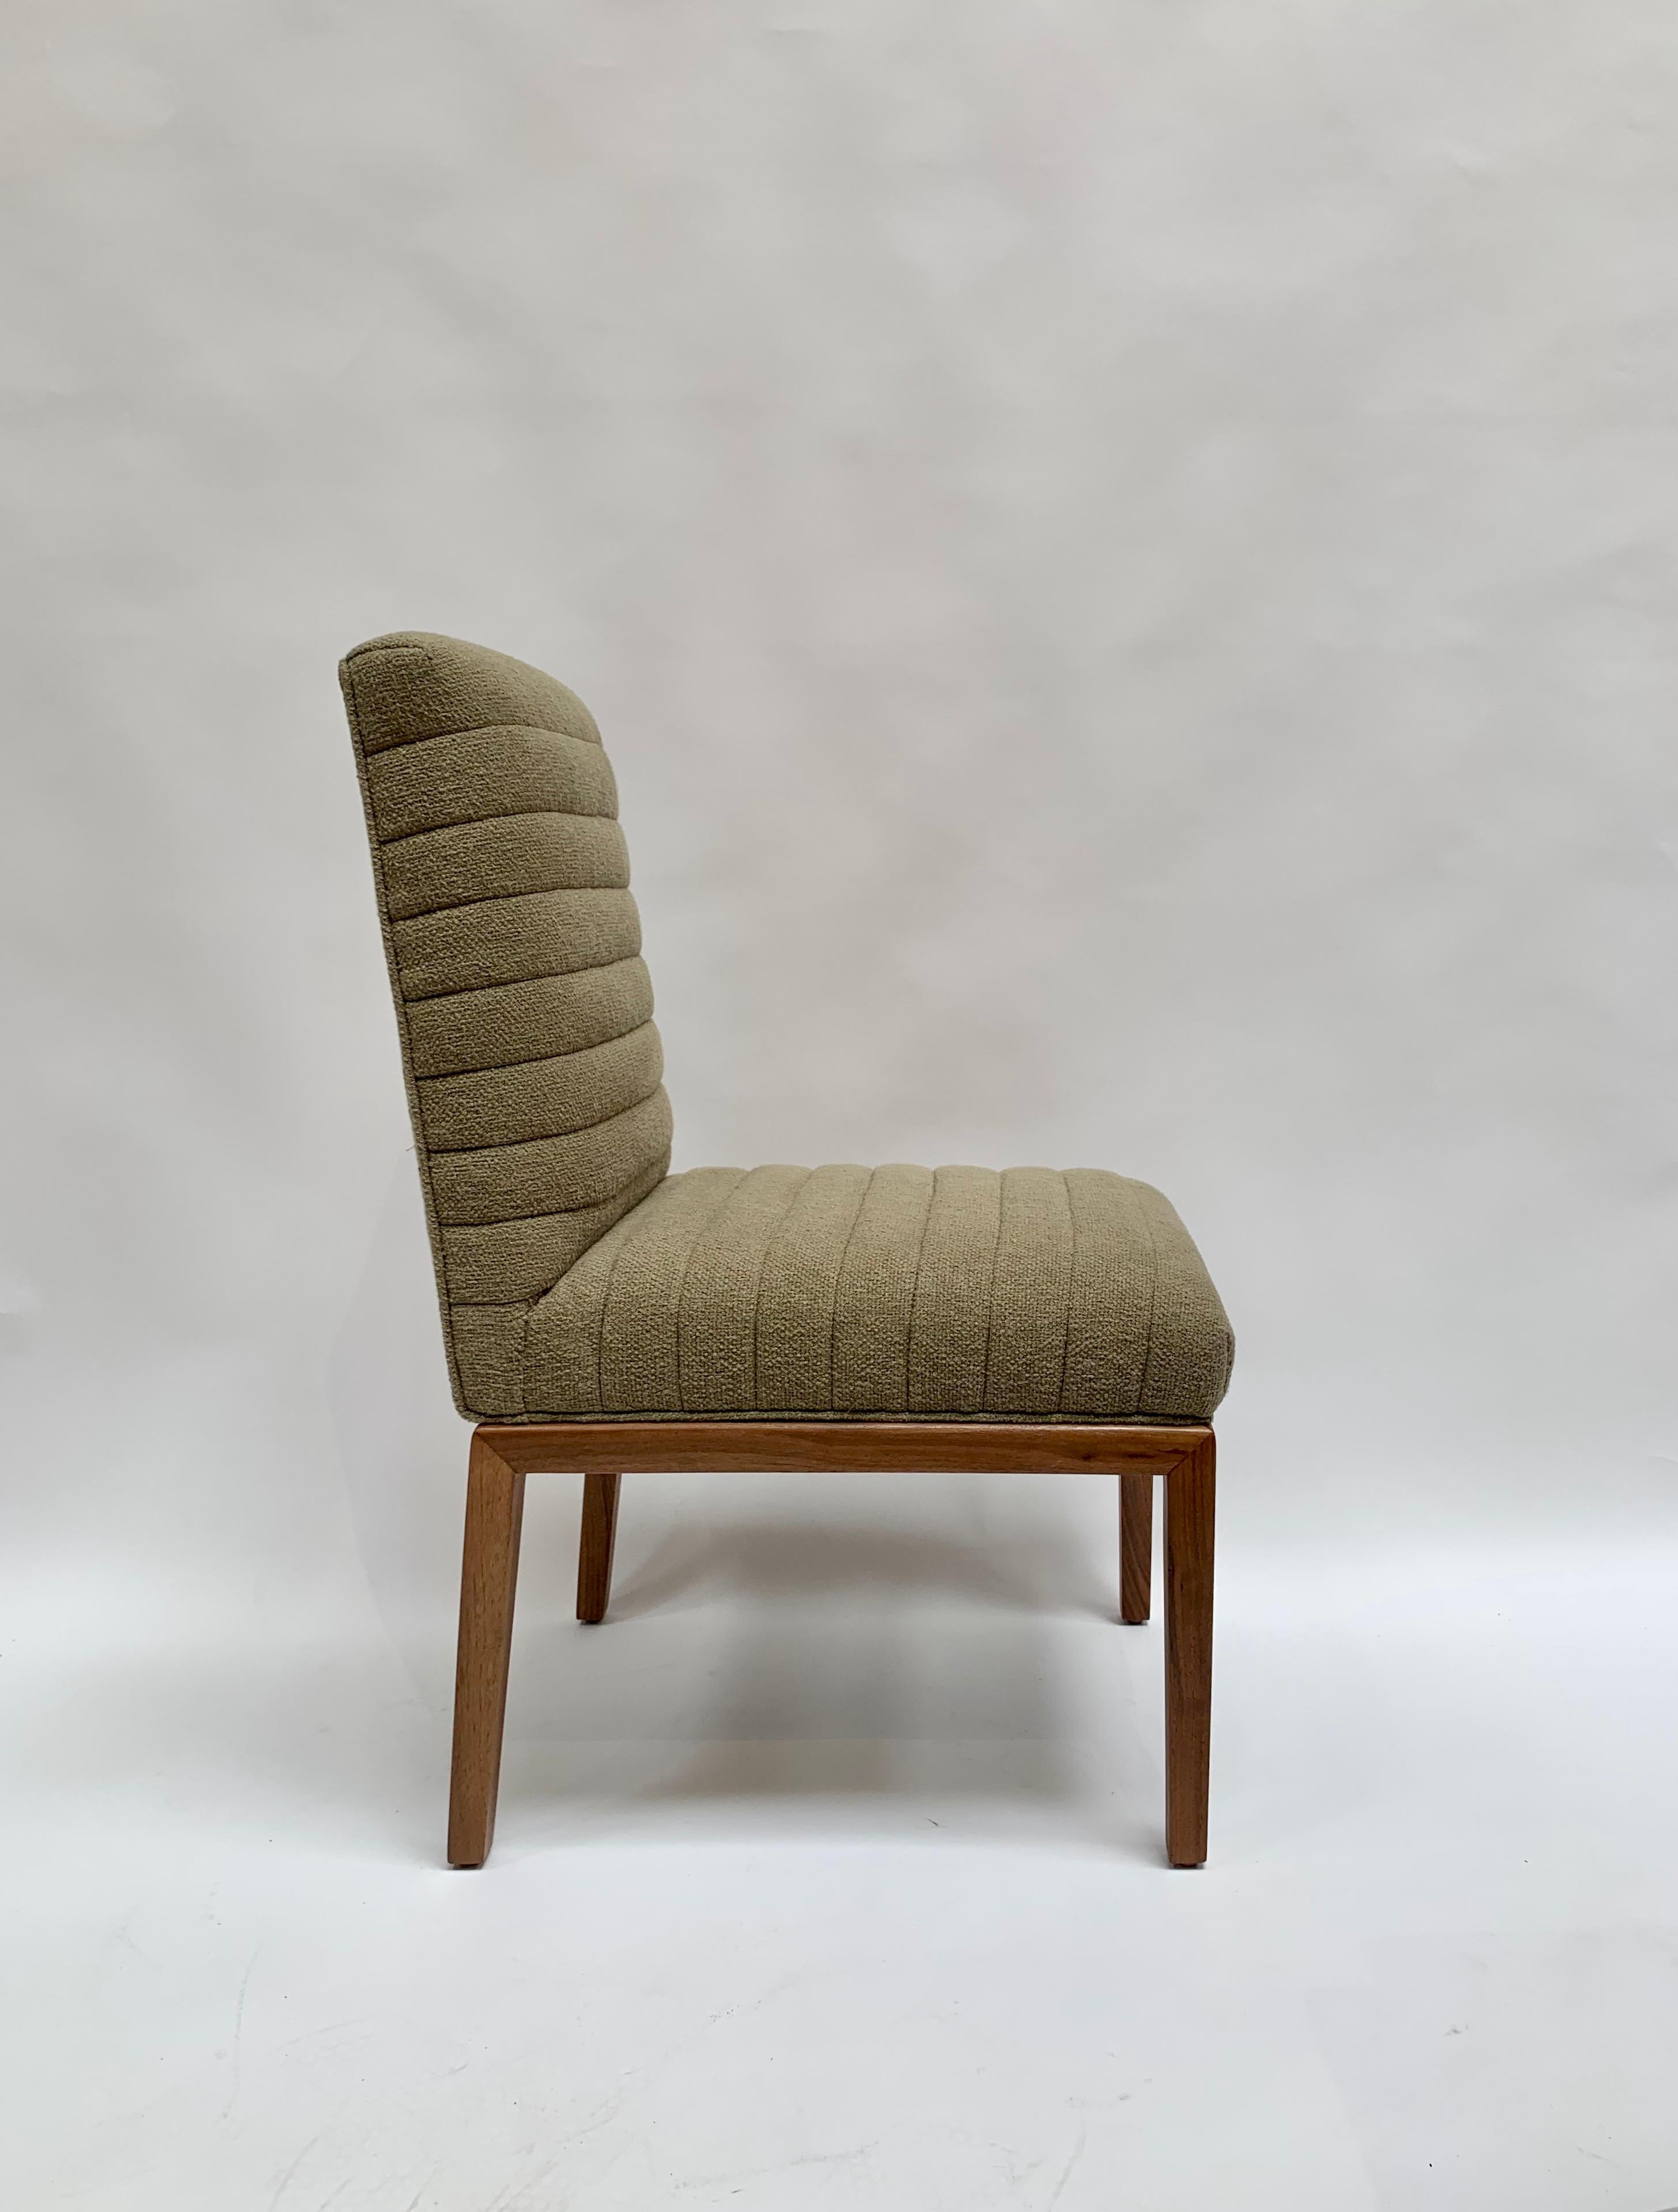 Mid-Century Modern Green Highback Shoreland Chair by Brian Paquette for Lawson-Fenning, In Stock